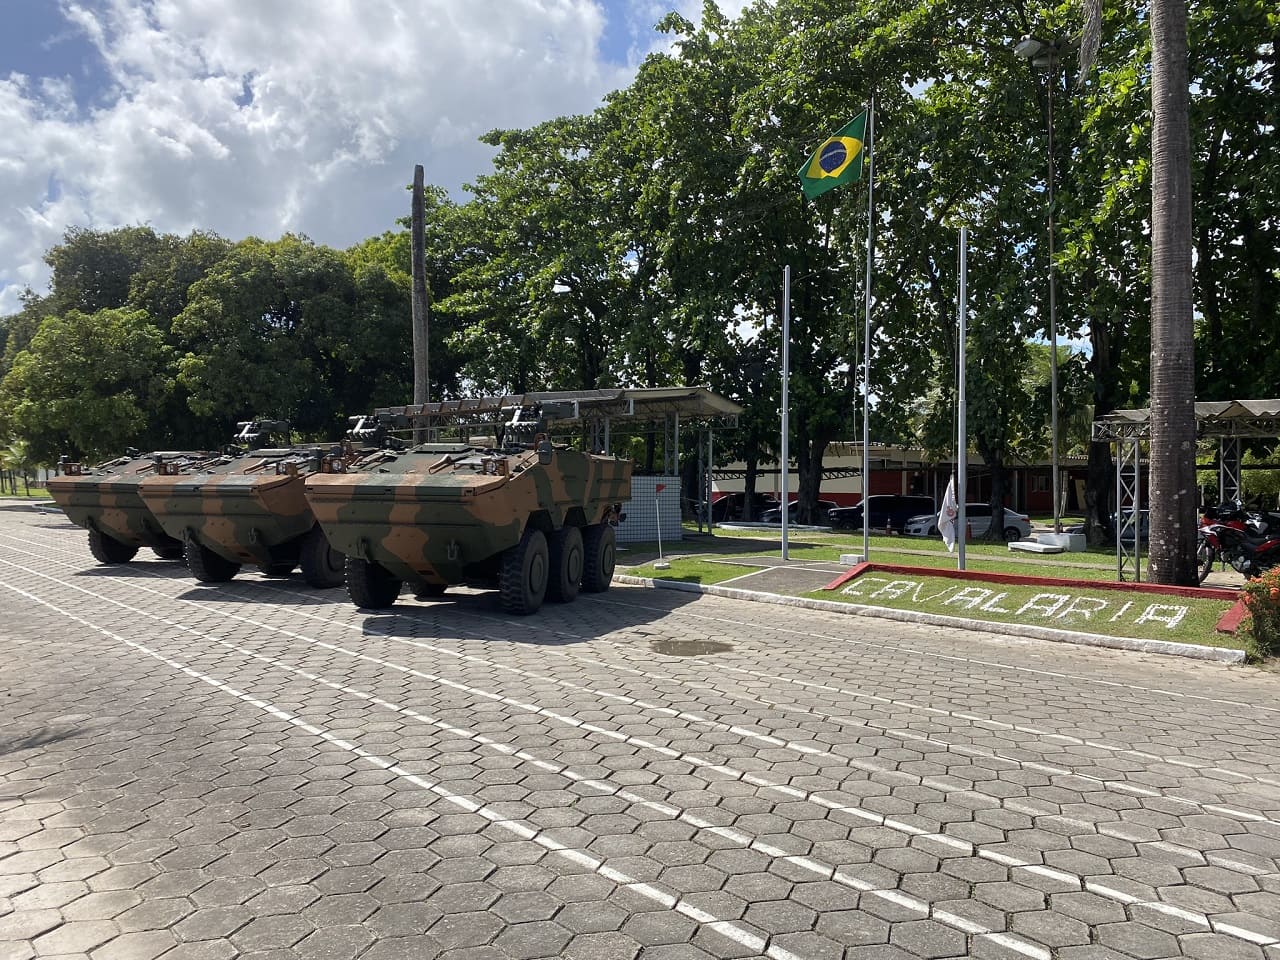 Cavalry Squadron receives 3 more GUARANI armored personnel carriers